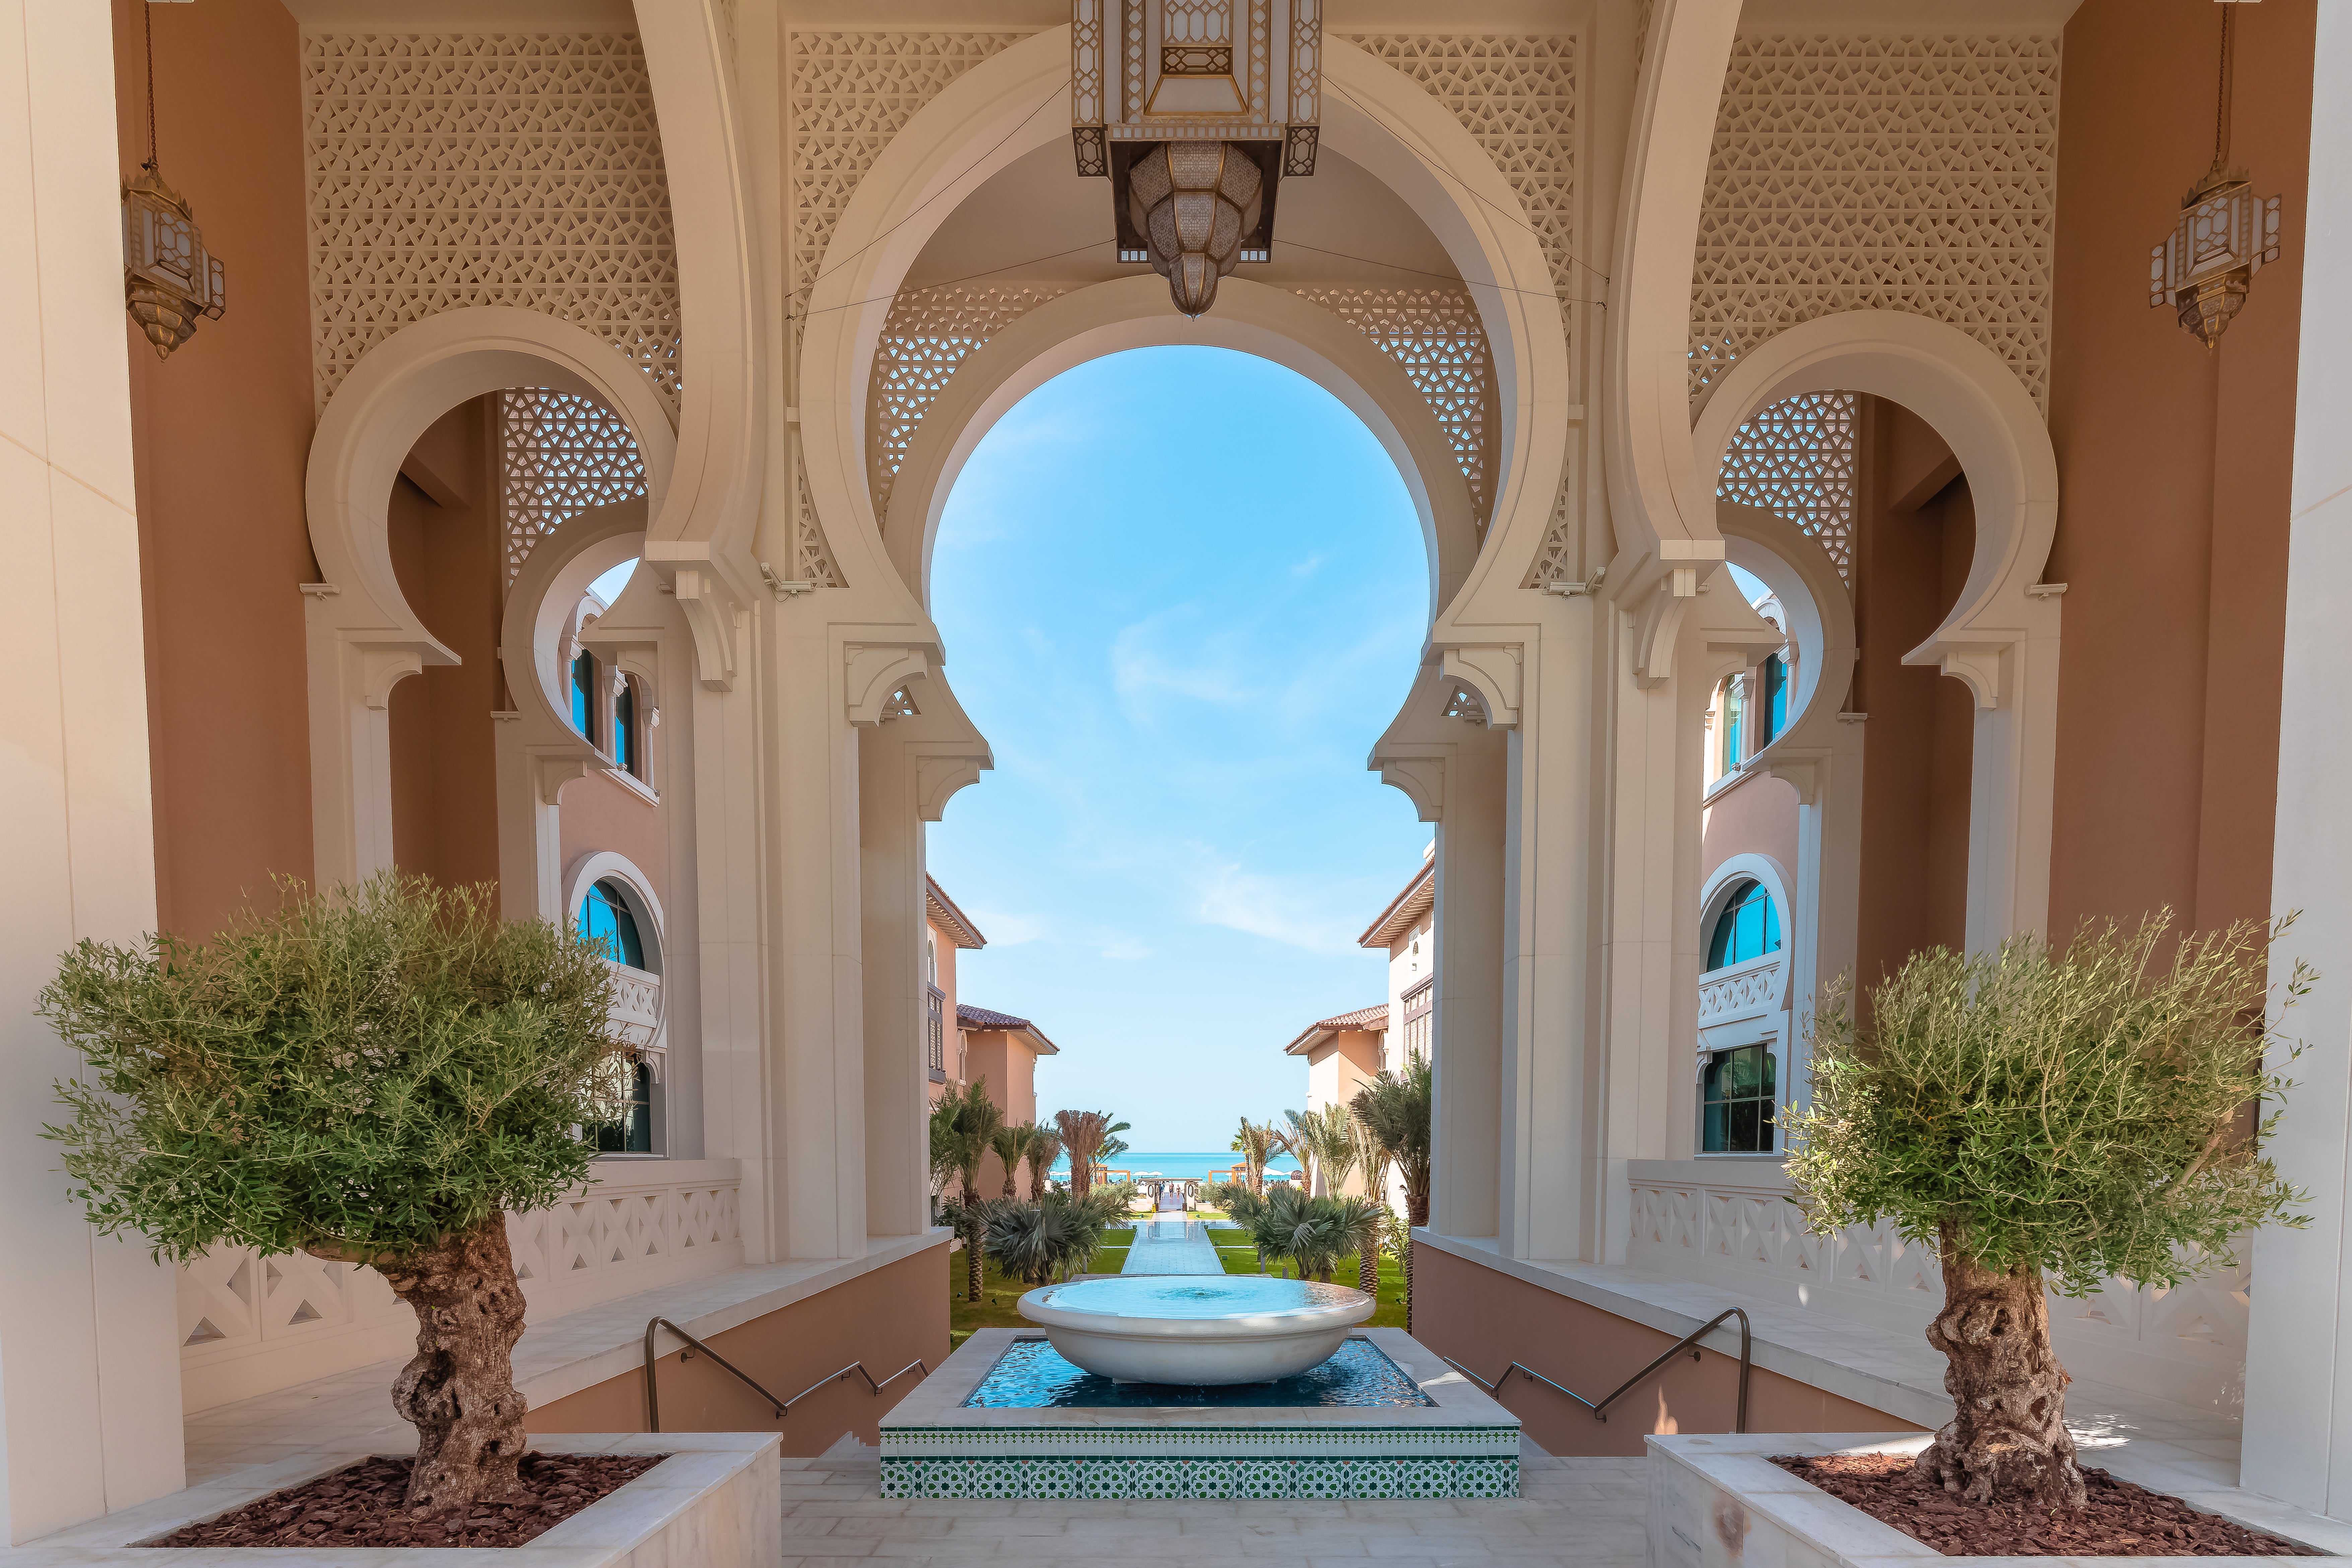 The incredible architecture at the Rixos Premium Saadiyat sets the tone for a luxe stay